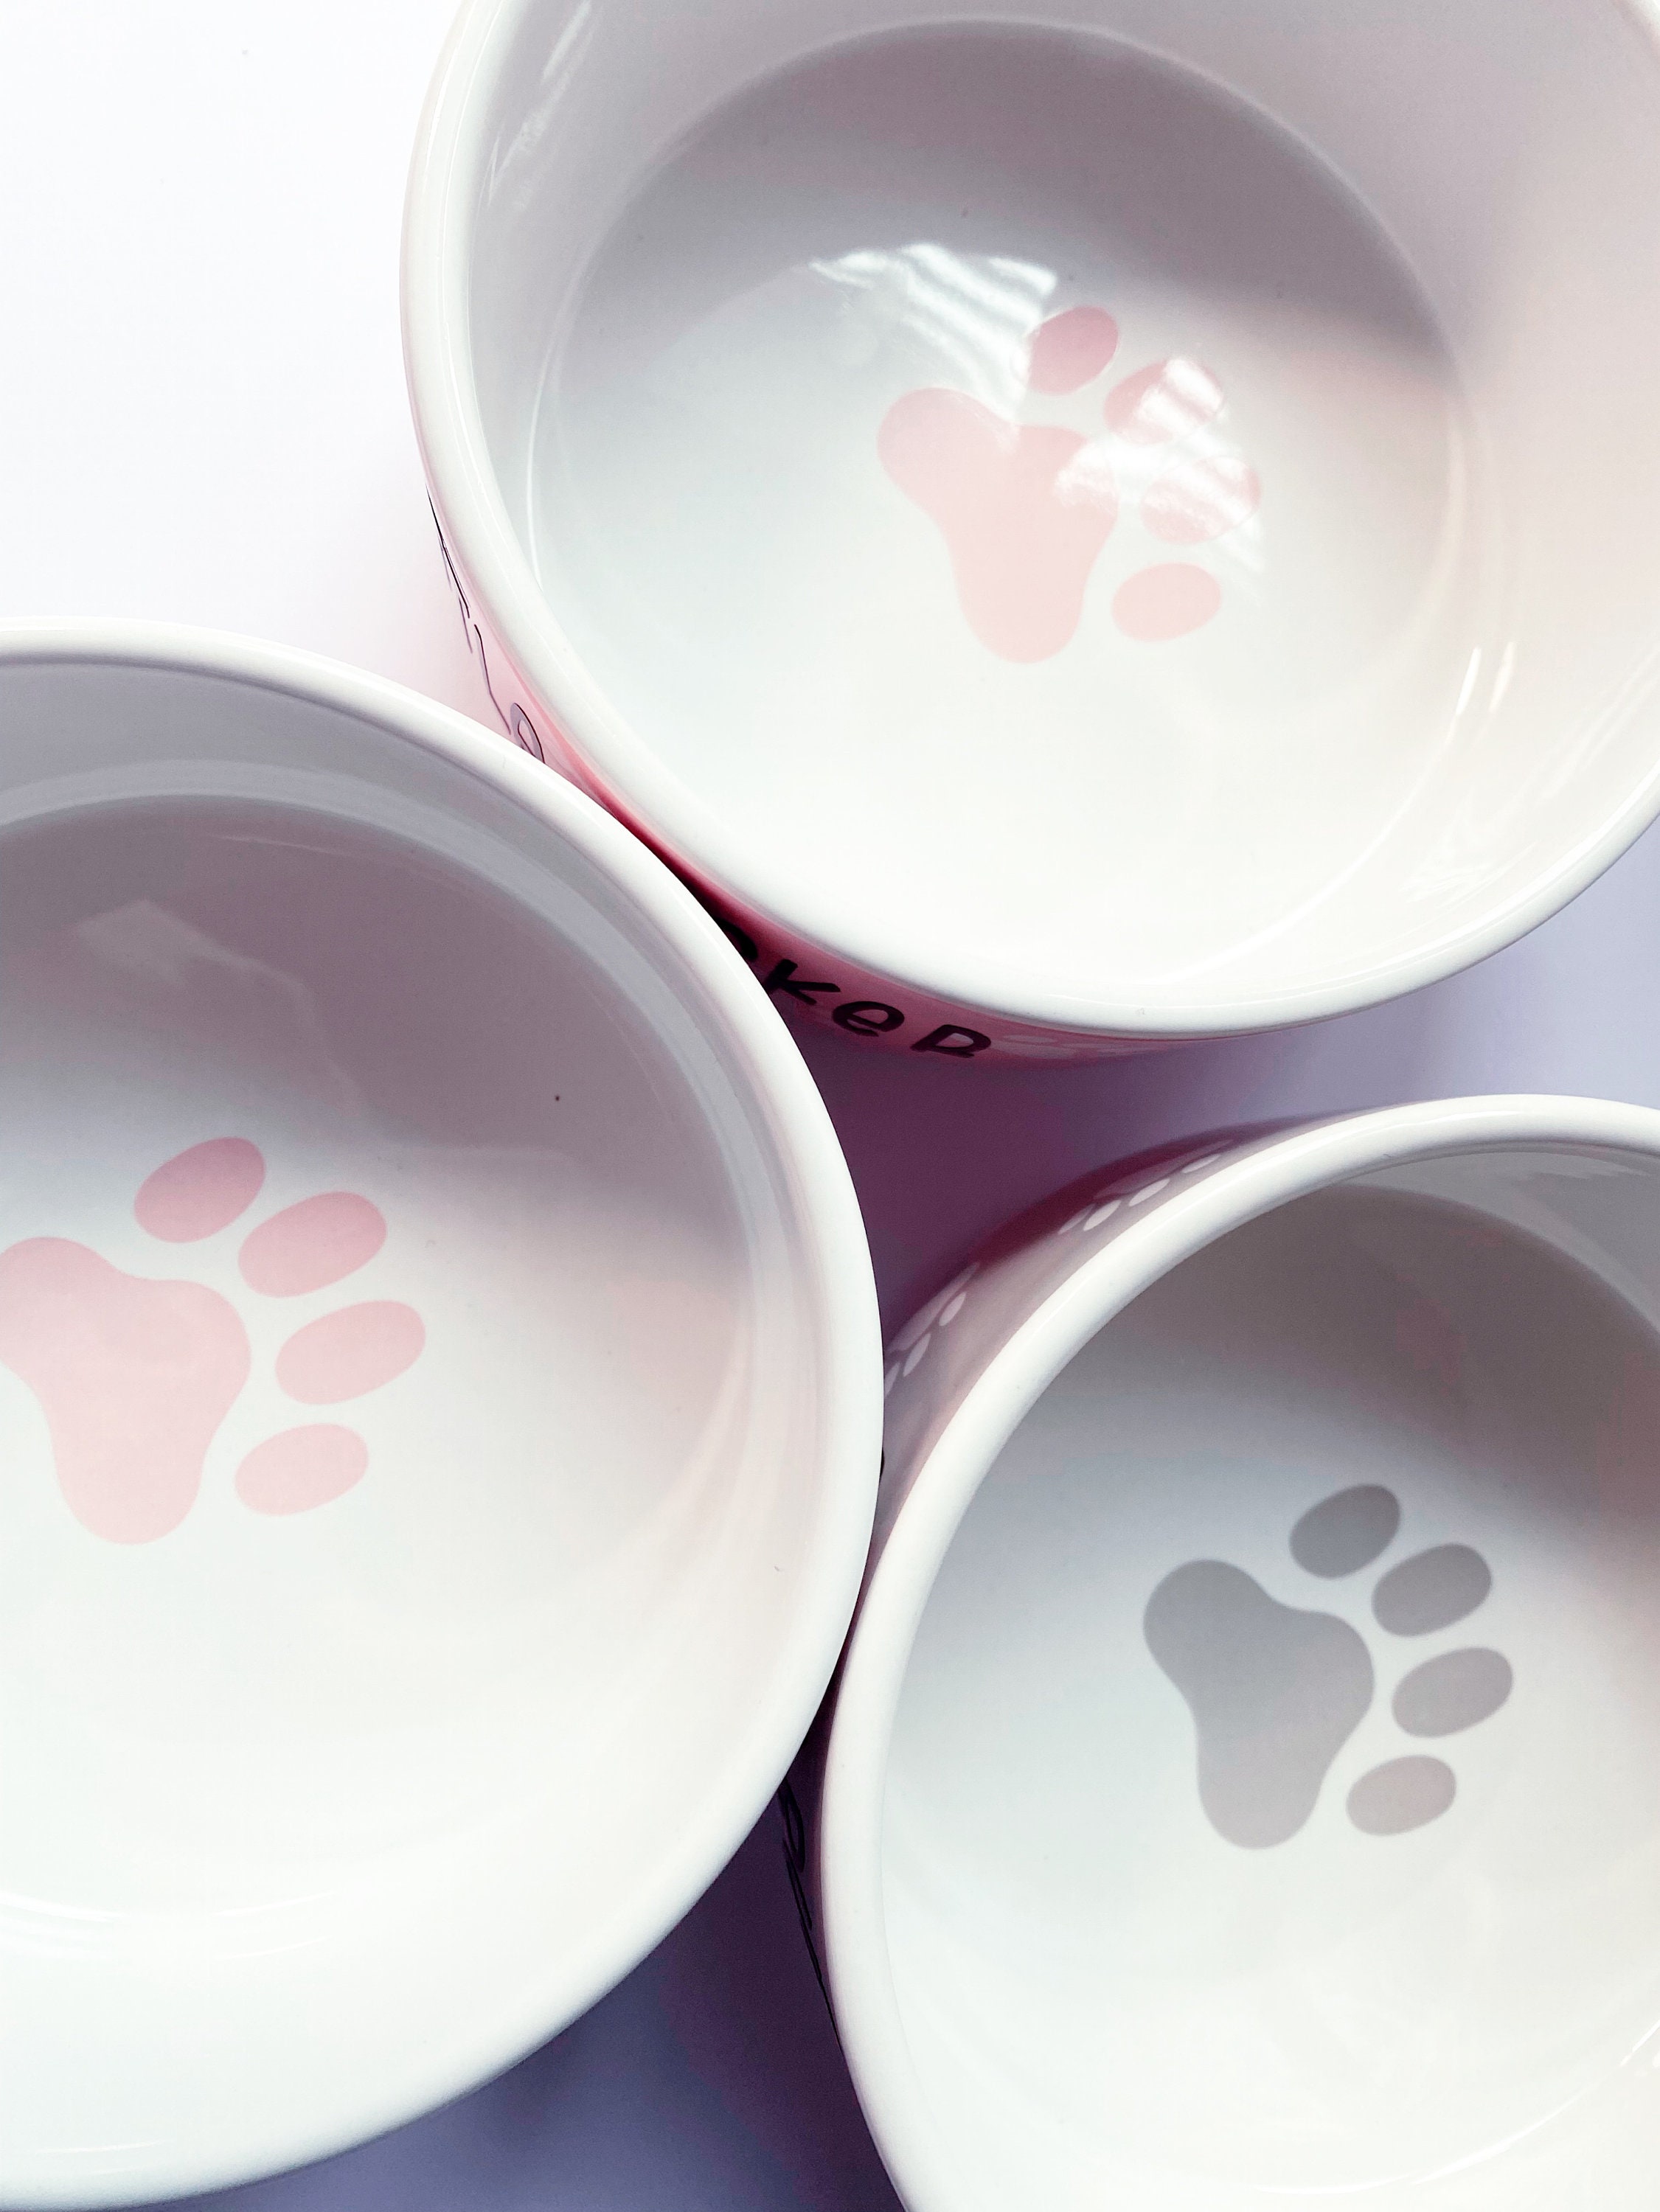 Rush's Paw Print: Non-Slip Dog Bowls - Fuzzy Puppy Pet Products